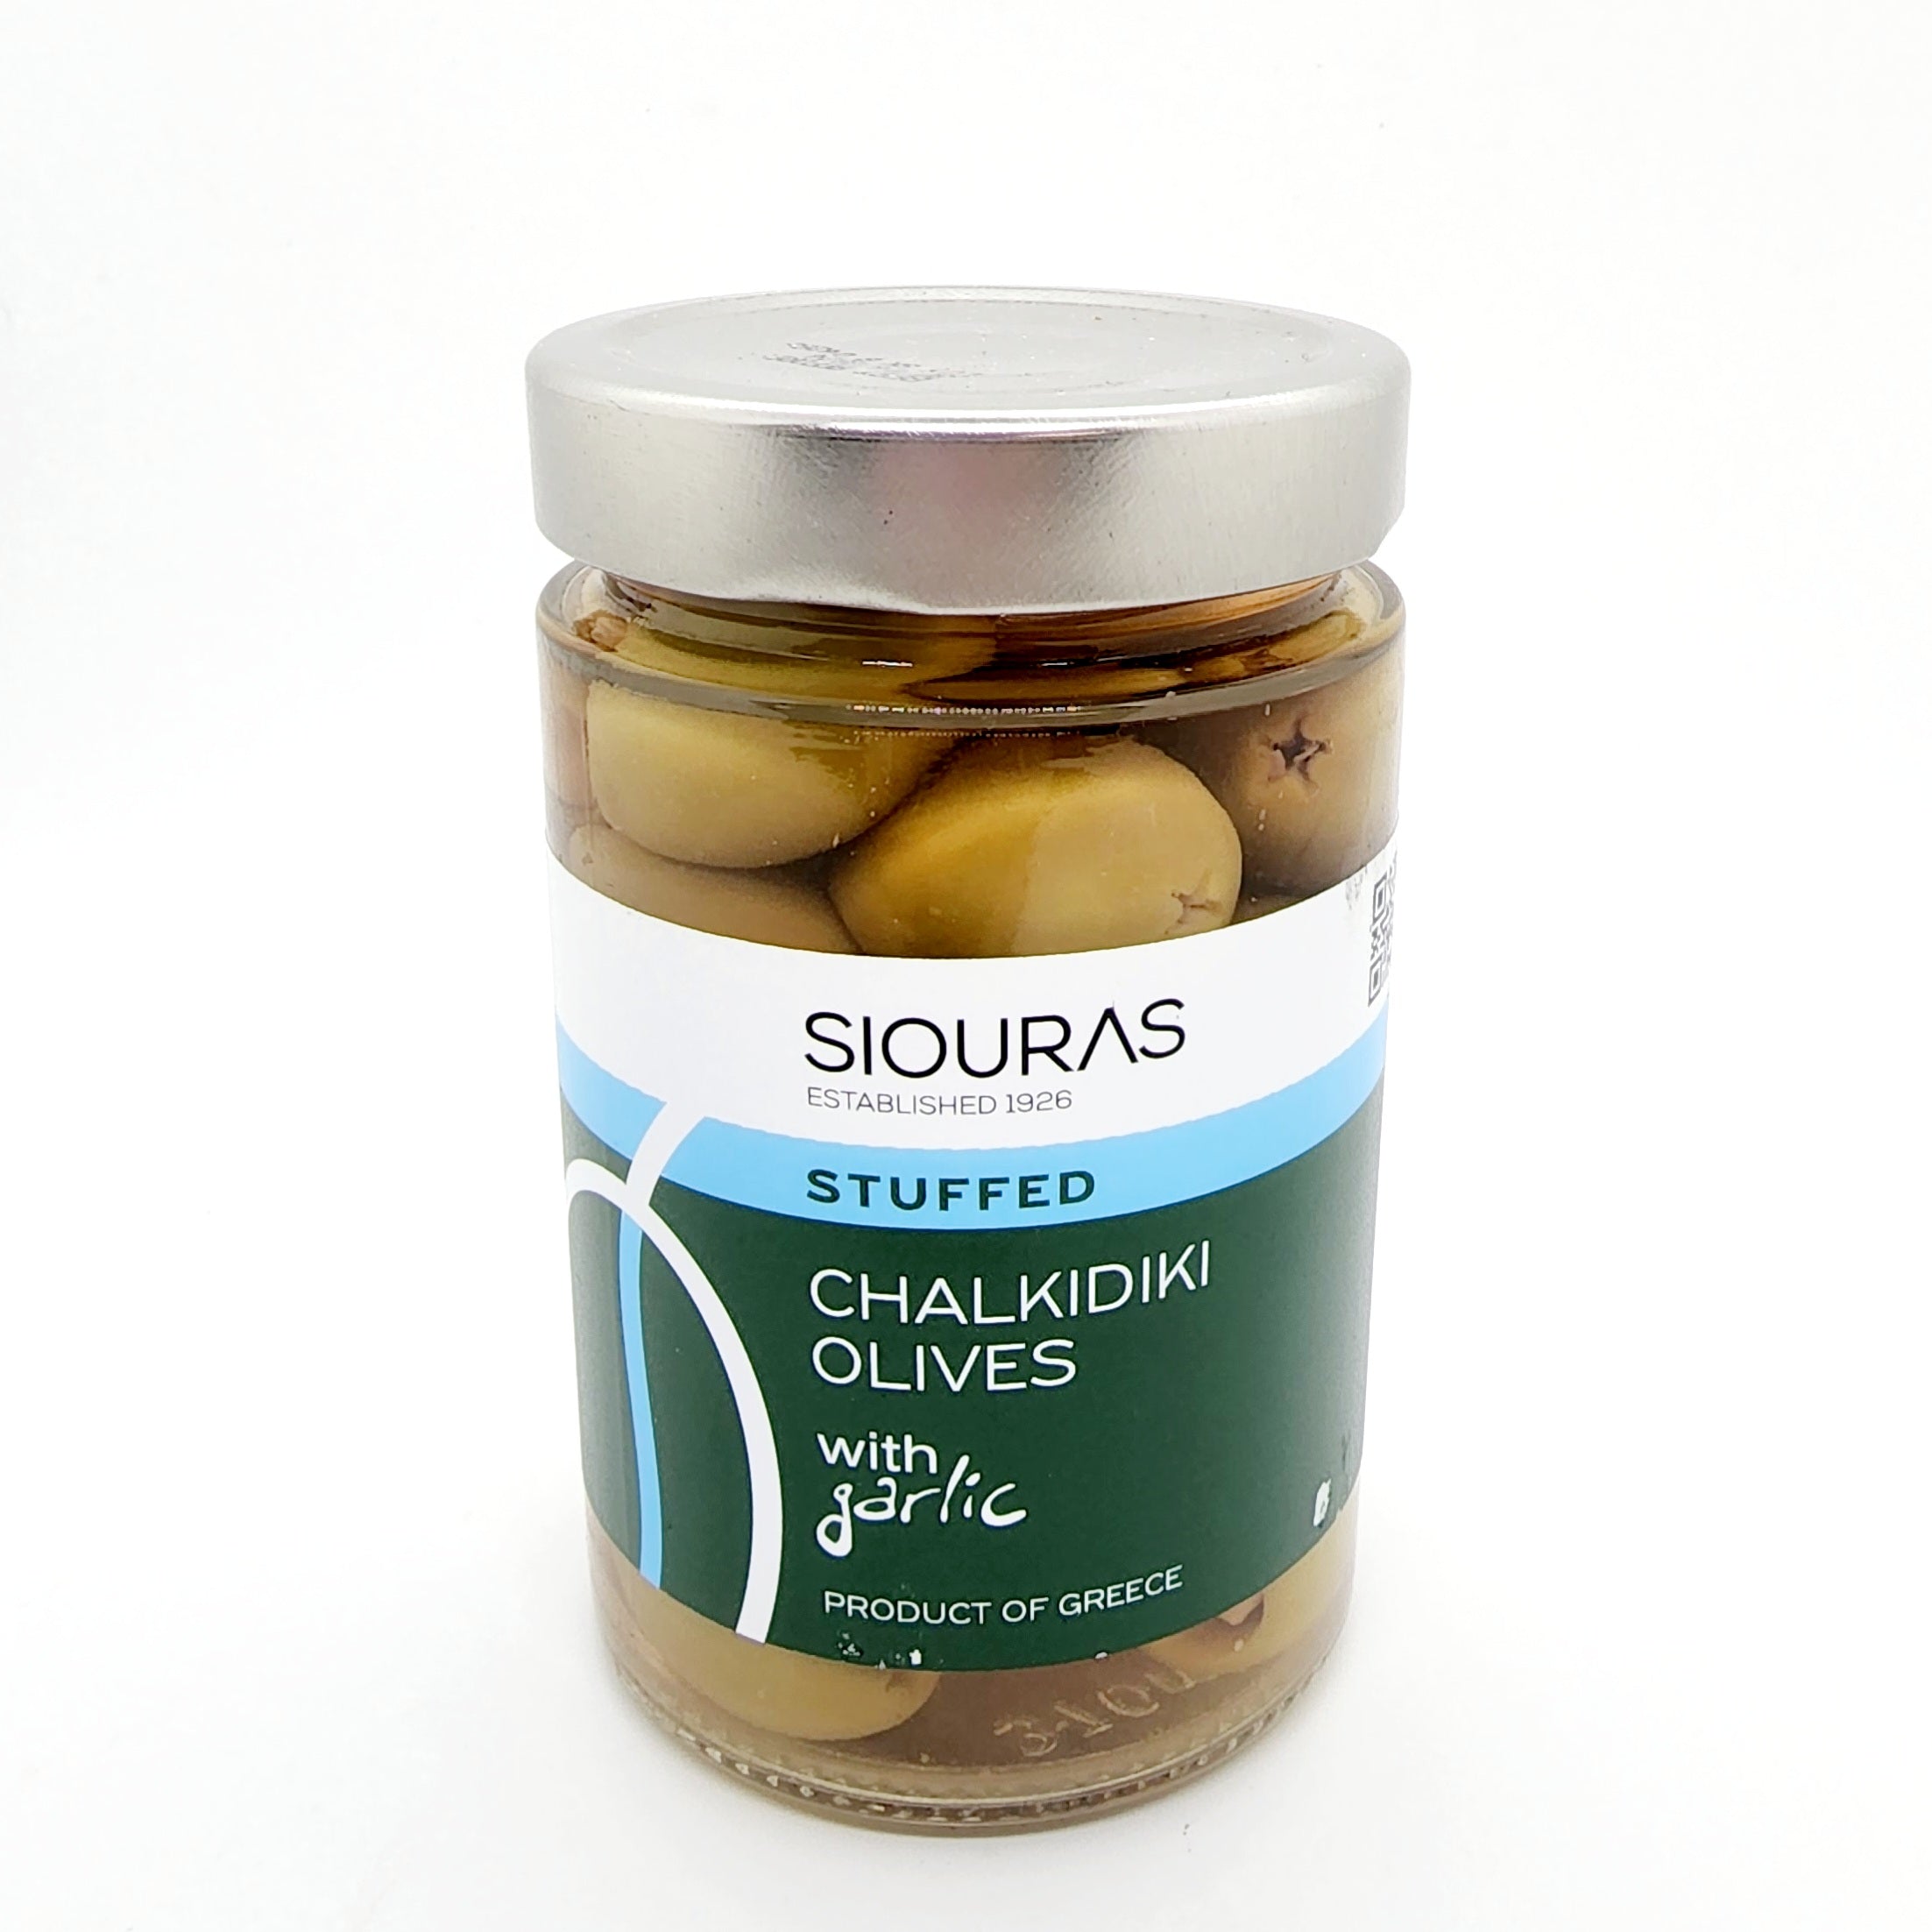 Siouras Green Olives Stuffed with Garlic